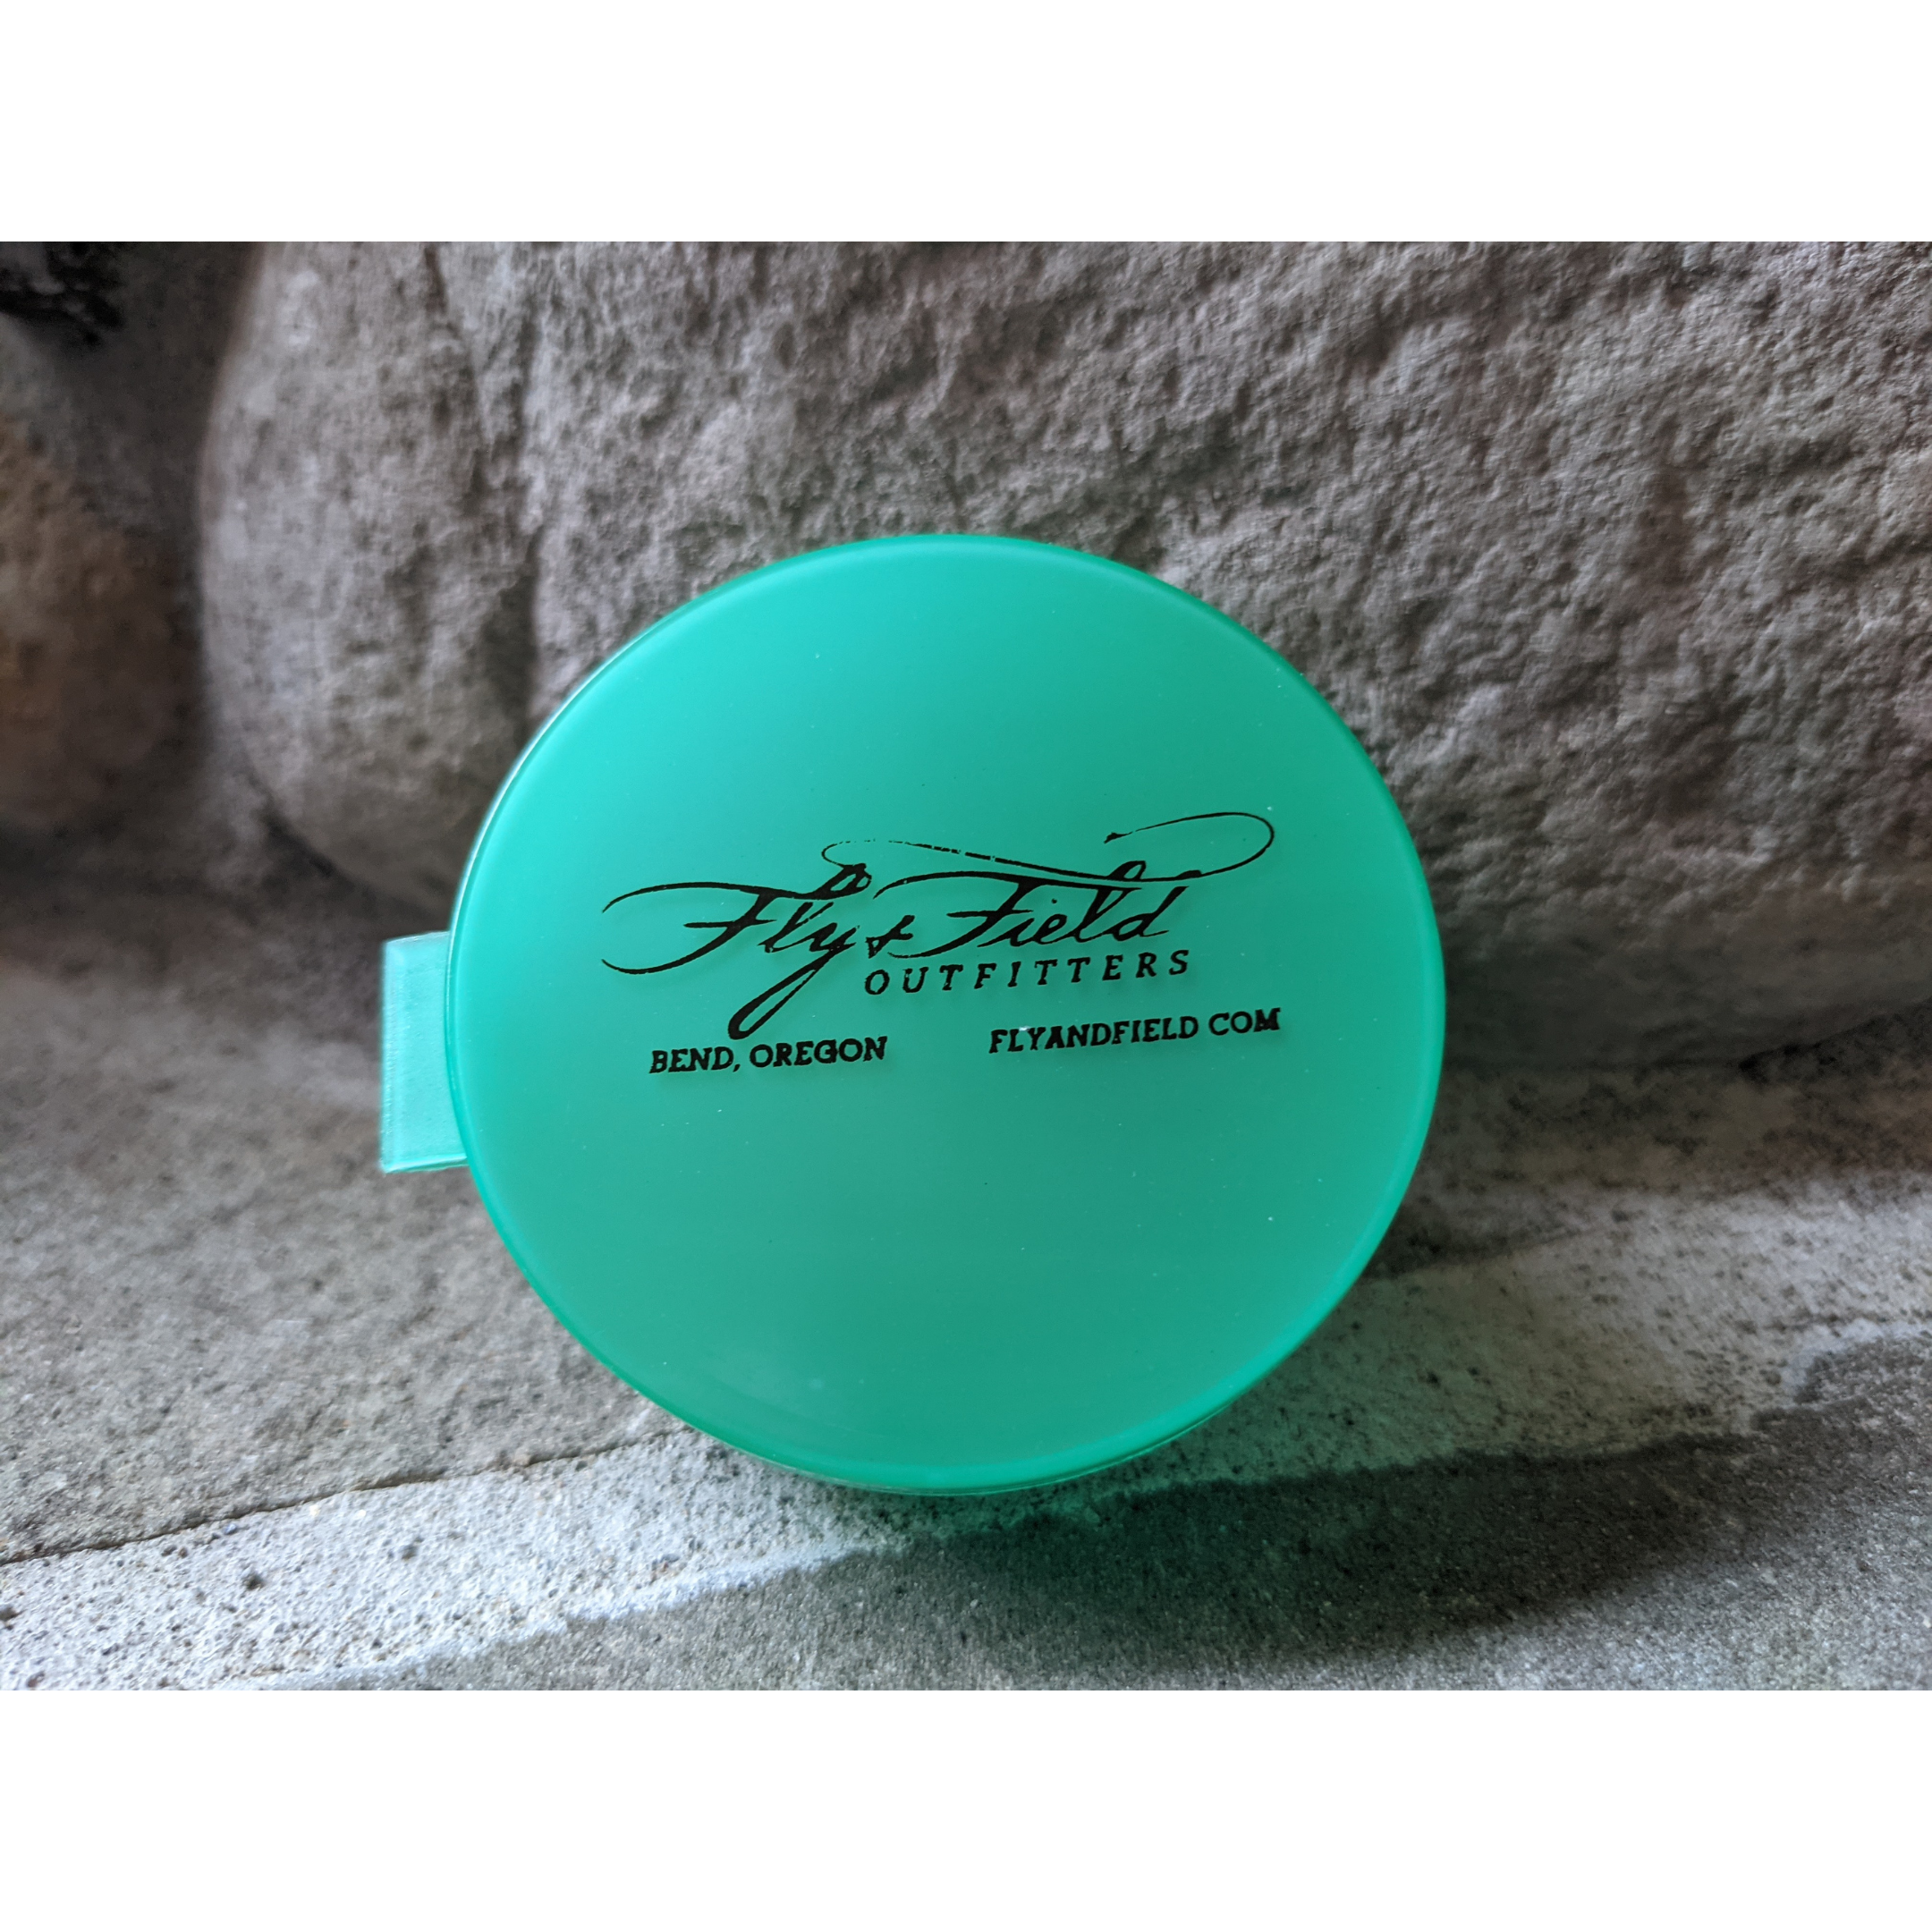  fishpond Shallow Fly Puck